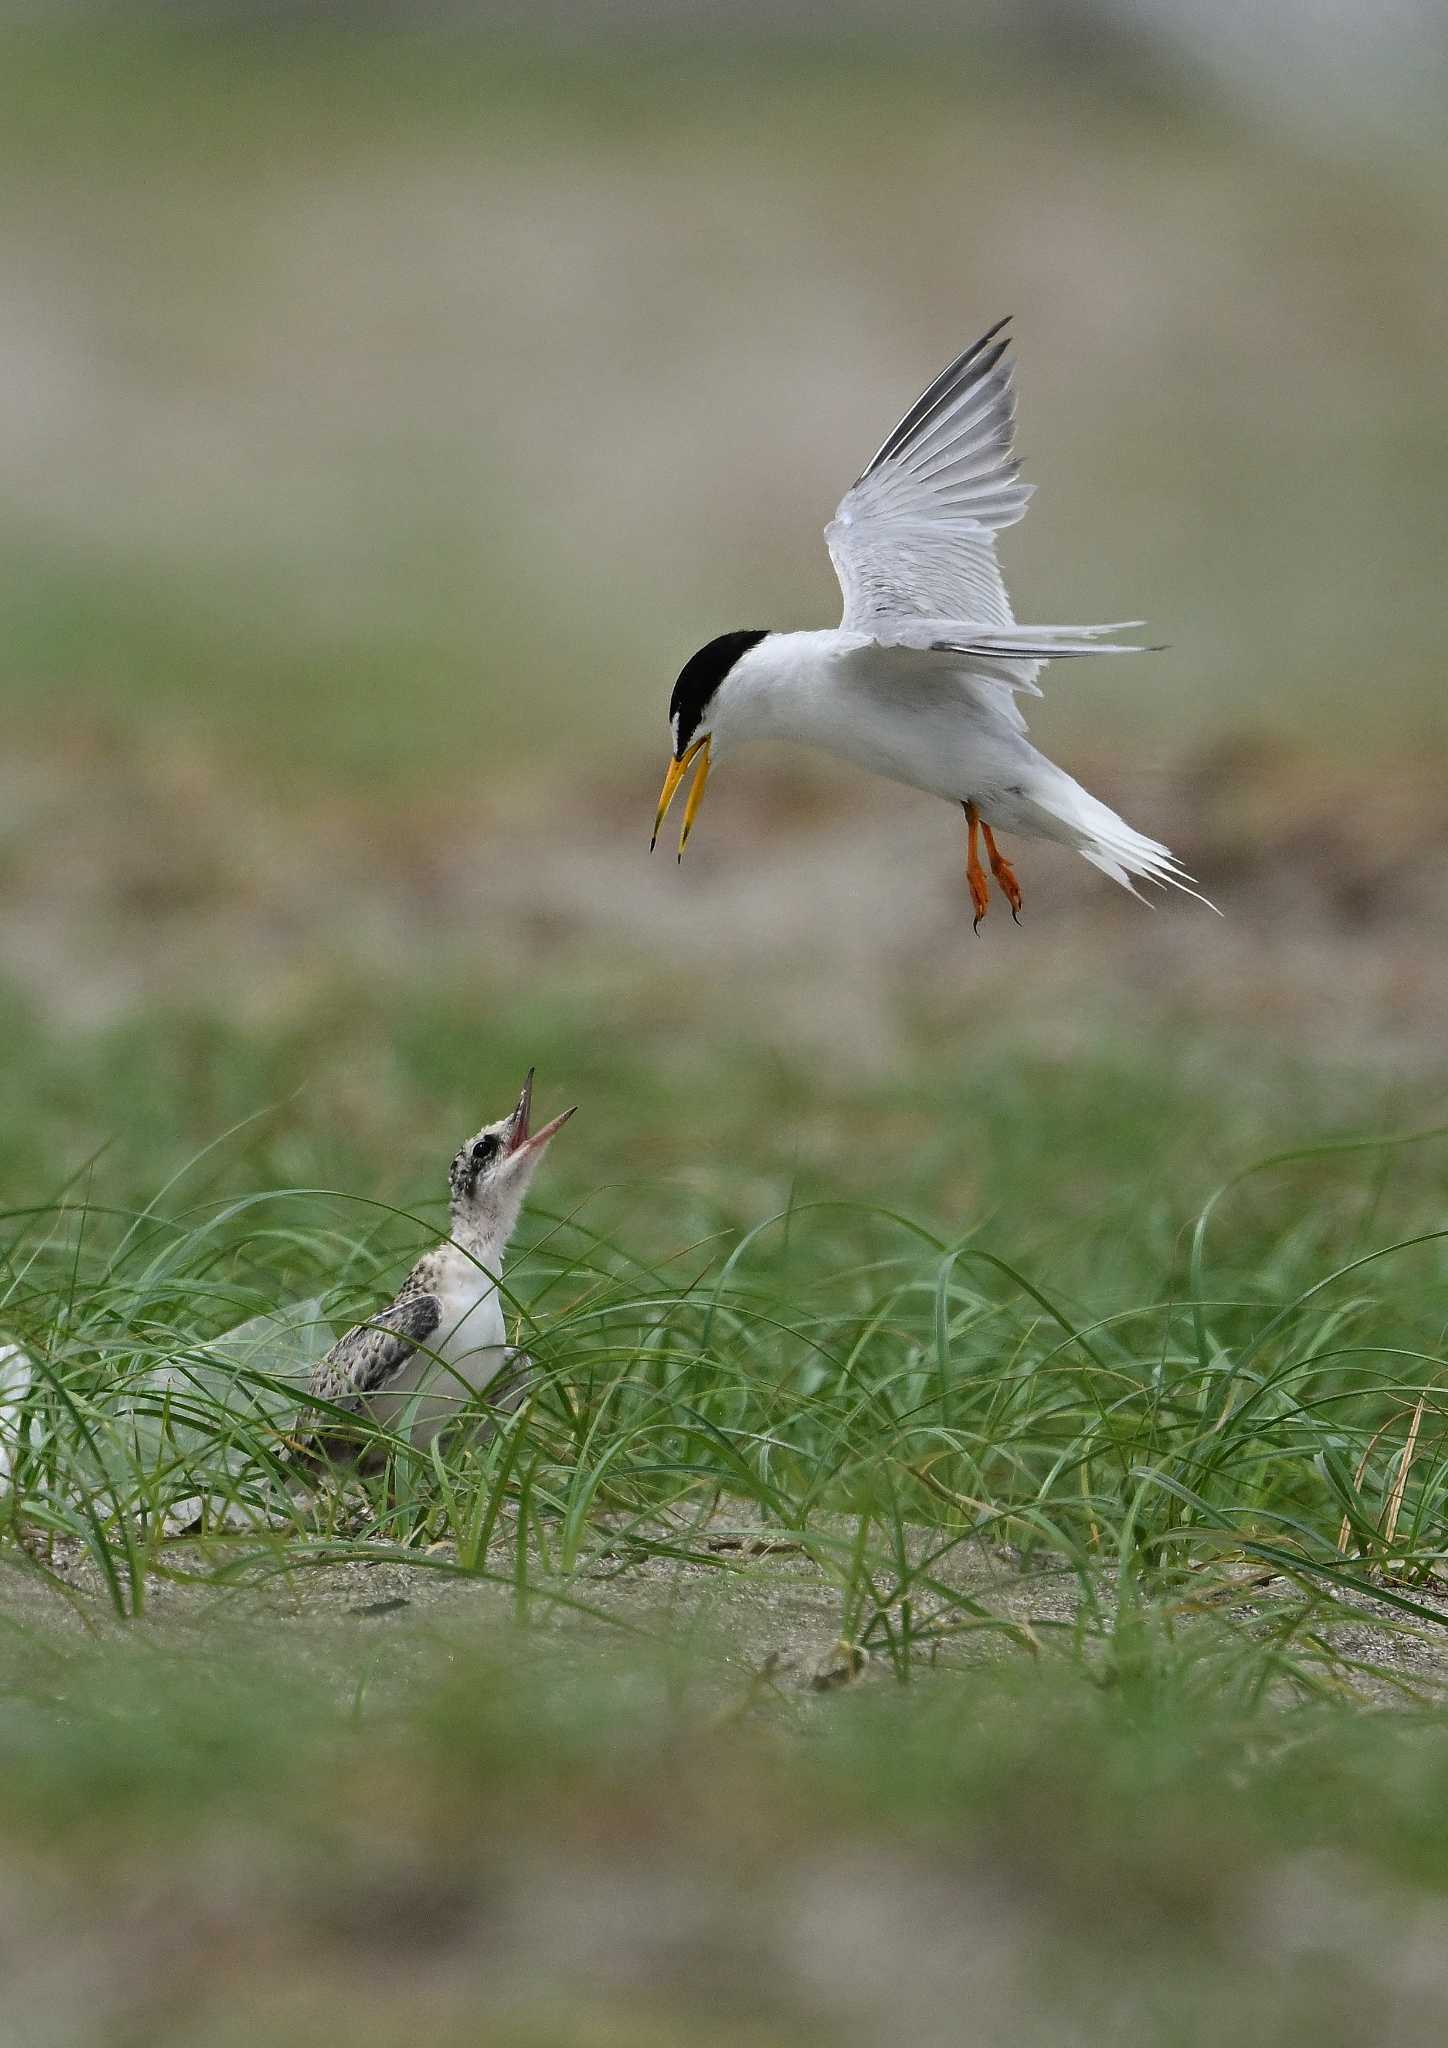 Photo of Little Tern at 検見川浜コアジサシ保護区 by アカウント13711